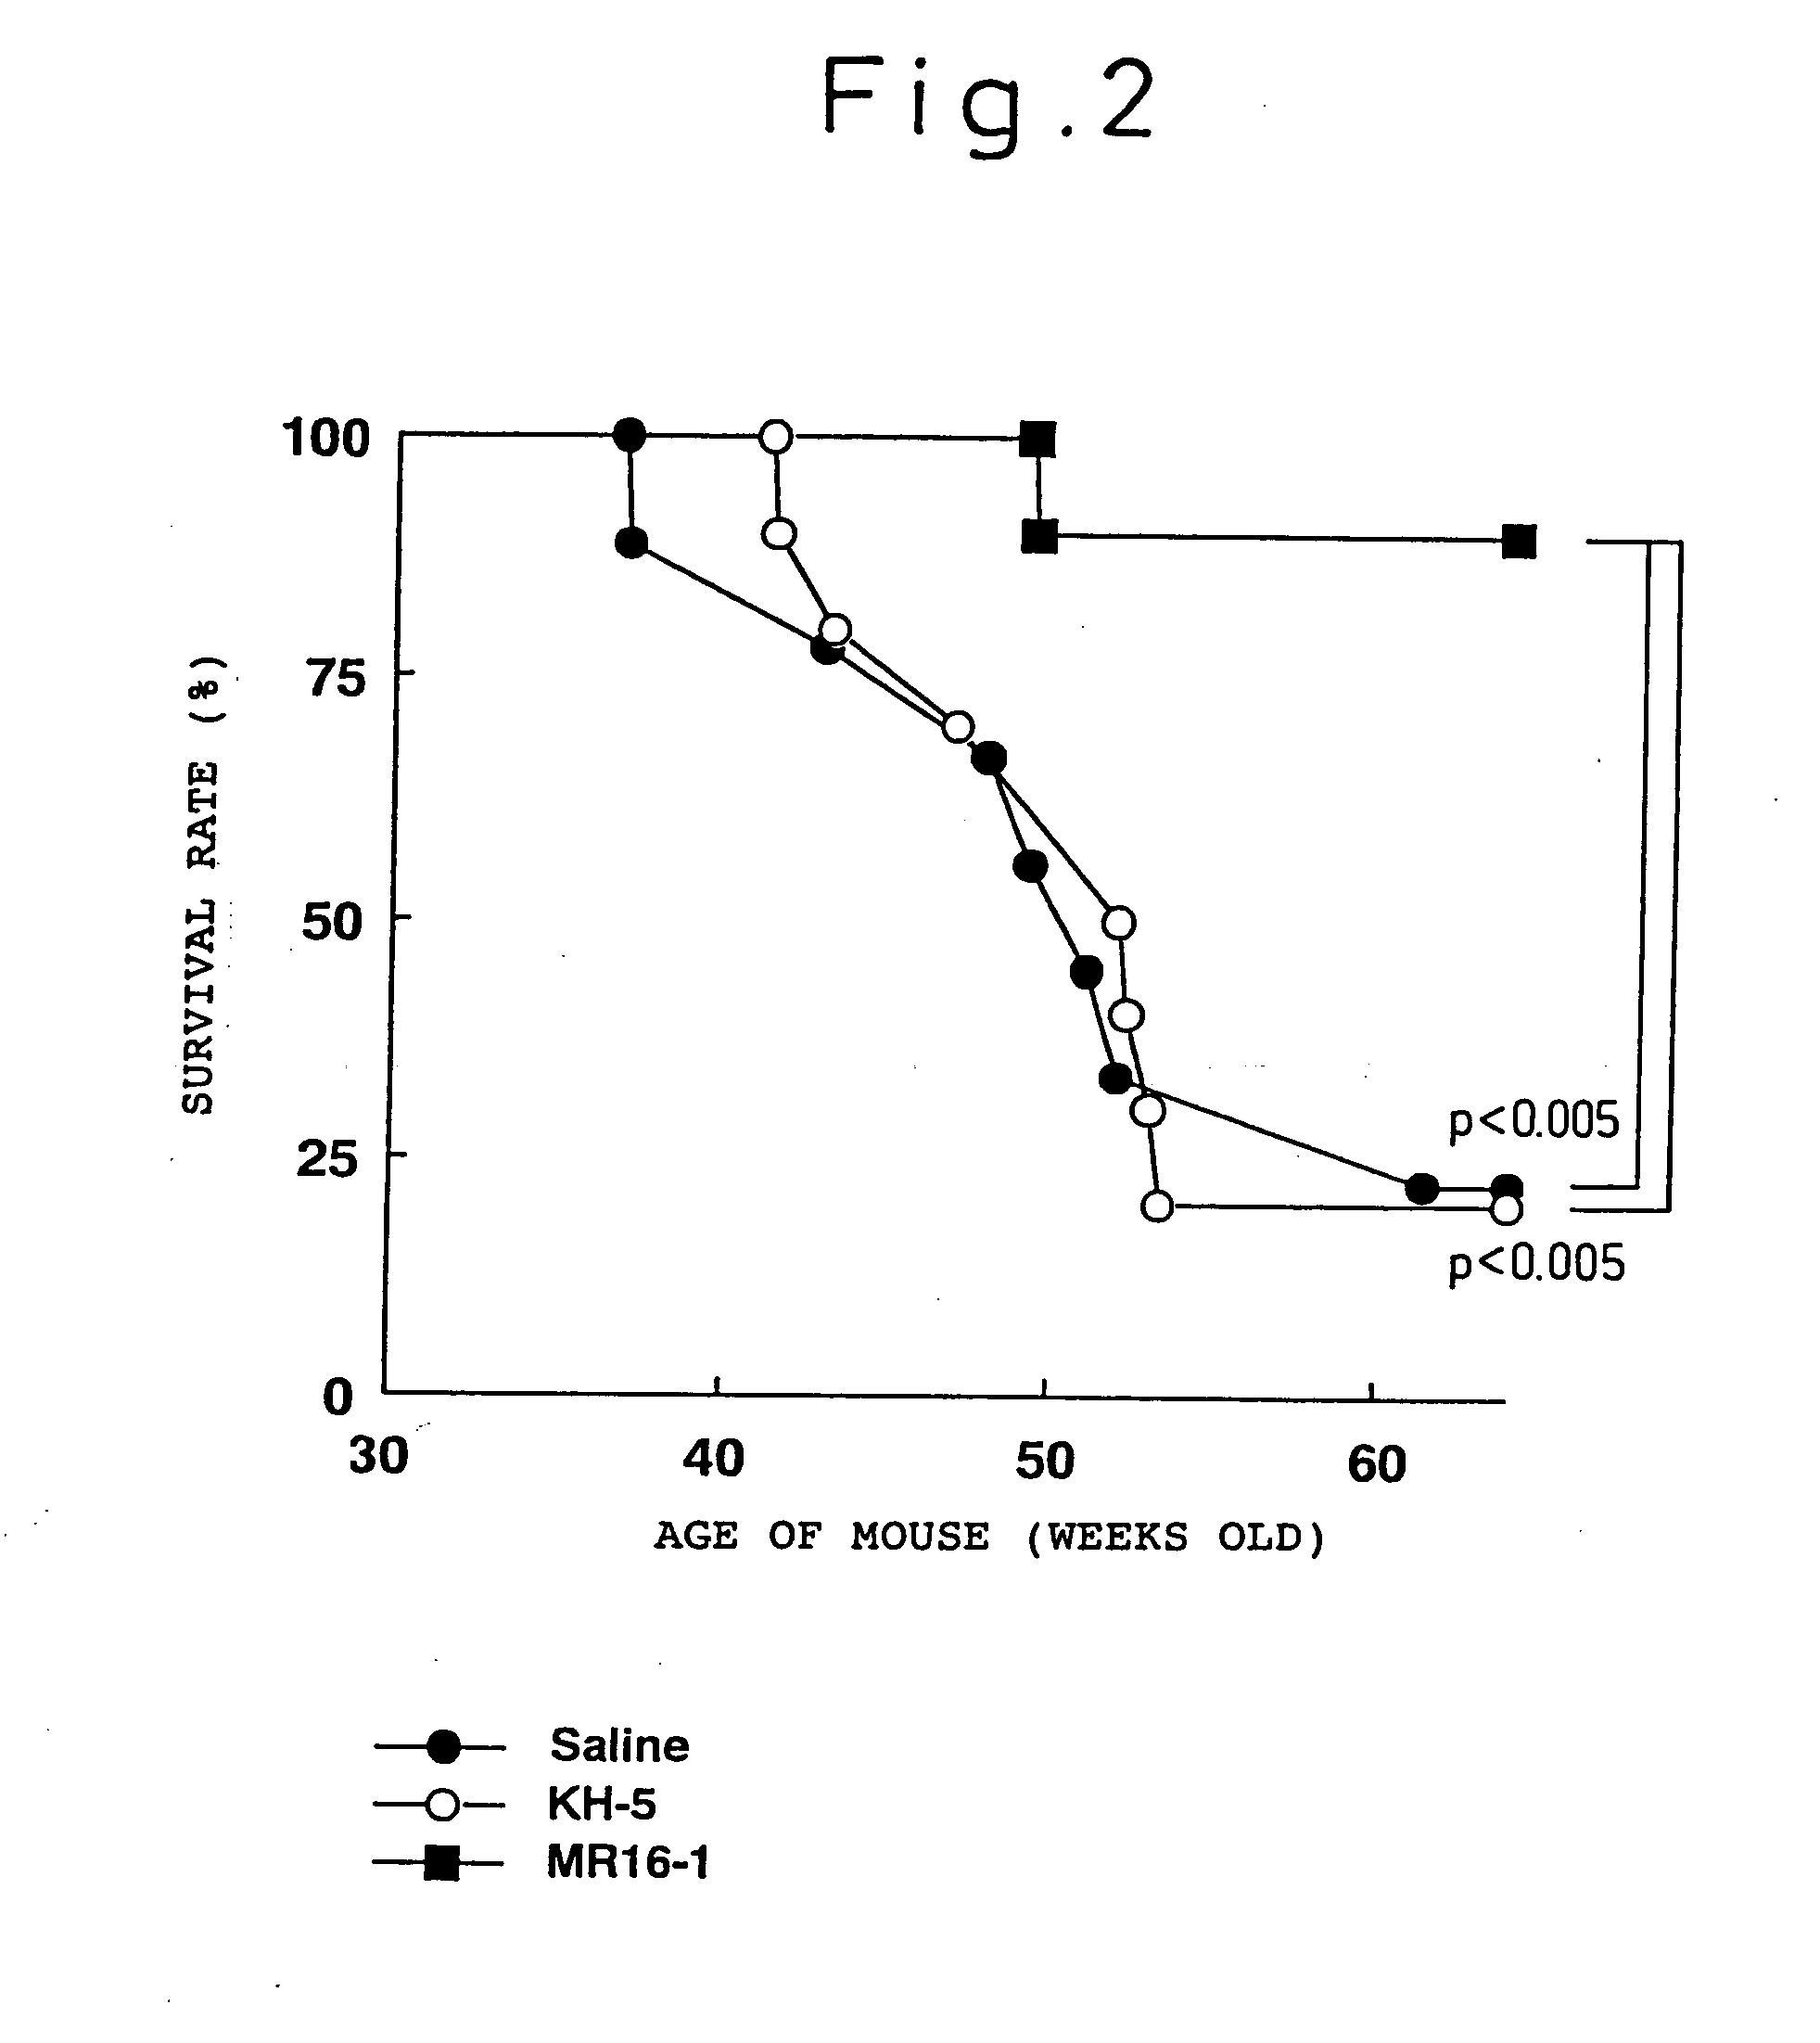 Preventive and/or therapeutic agent for systemic lupus erythematosus comprising anti-lL-6 receptor antibody as an active ingredient